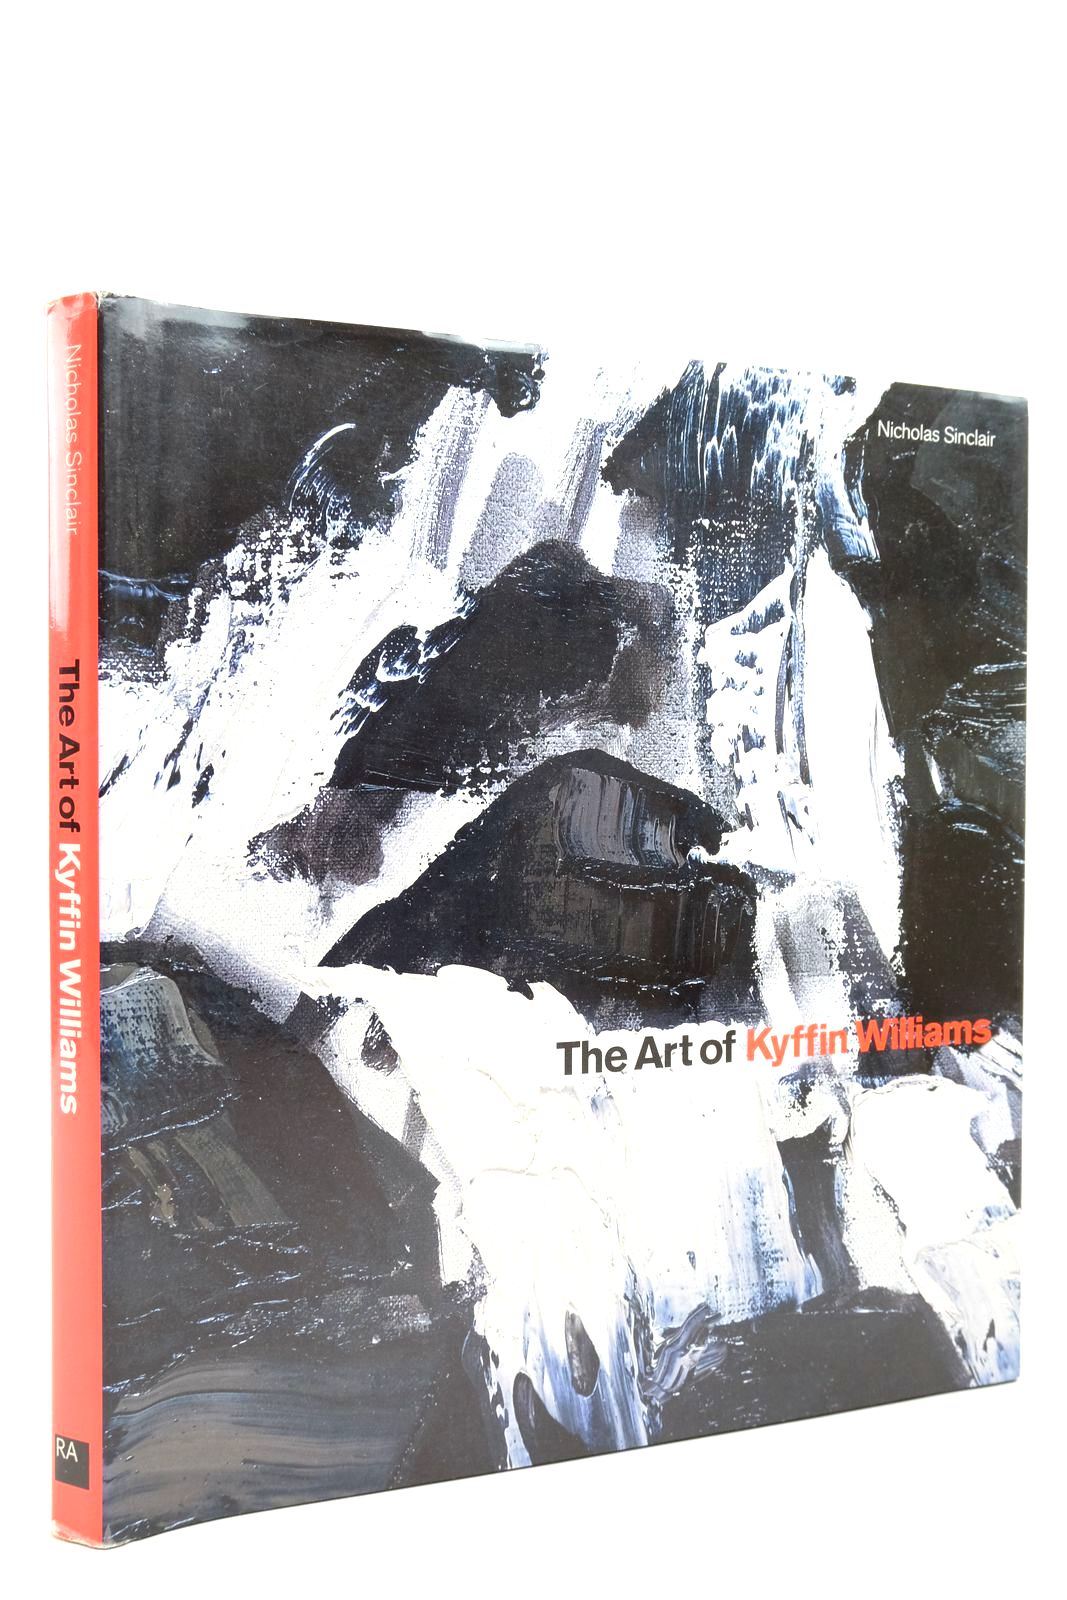 Photo of THE ART OF KYFFIN WILLIAMS written by Sinclair, Nicholas Evans, Rian illustrated by Williams, Kyffin published by Royal Academy of Arts (STOCK CODE: 2140681)  for sale by Stella & Rose's Books